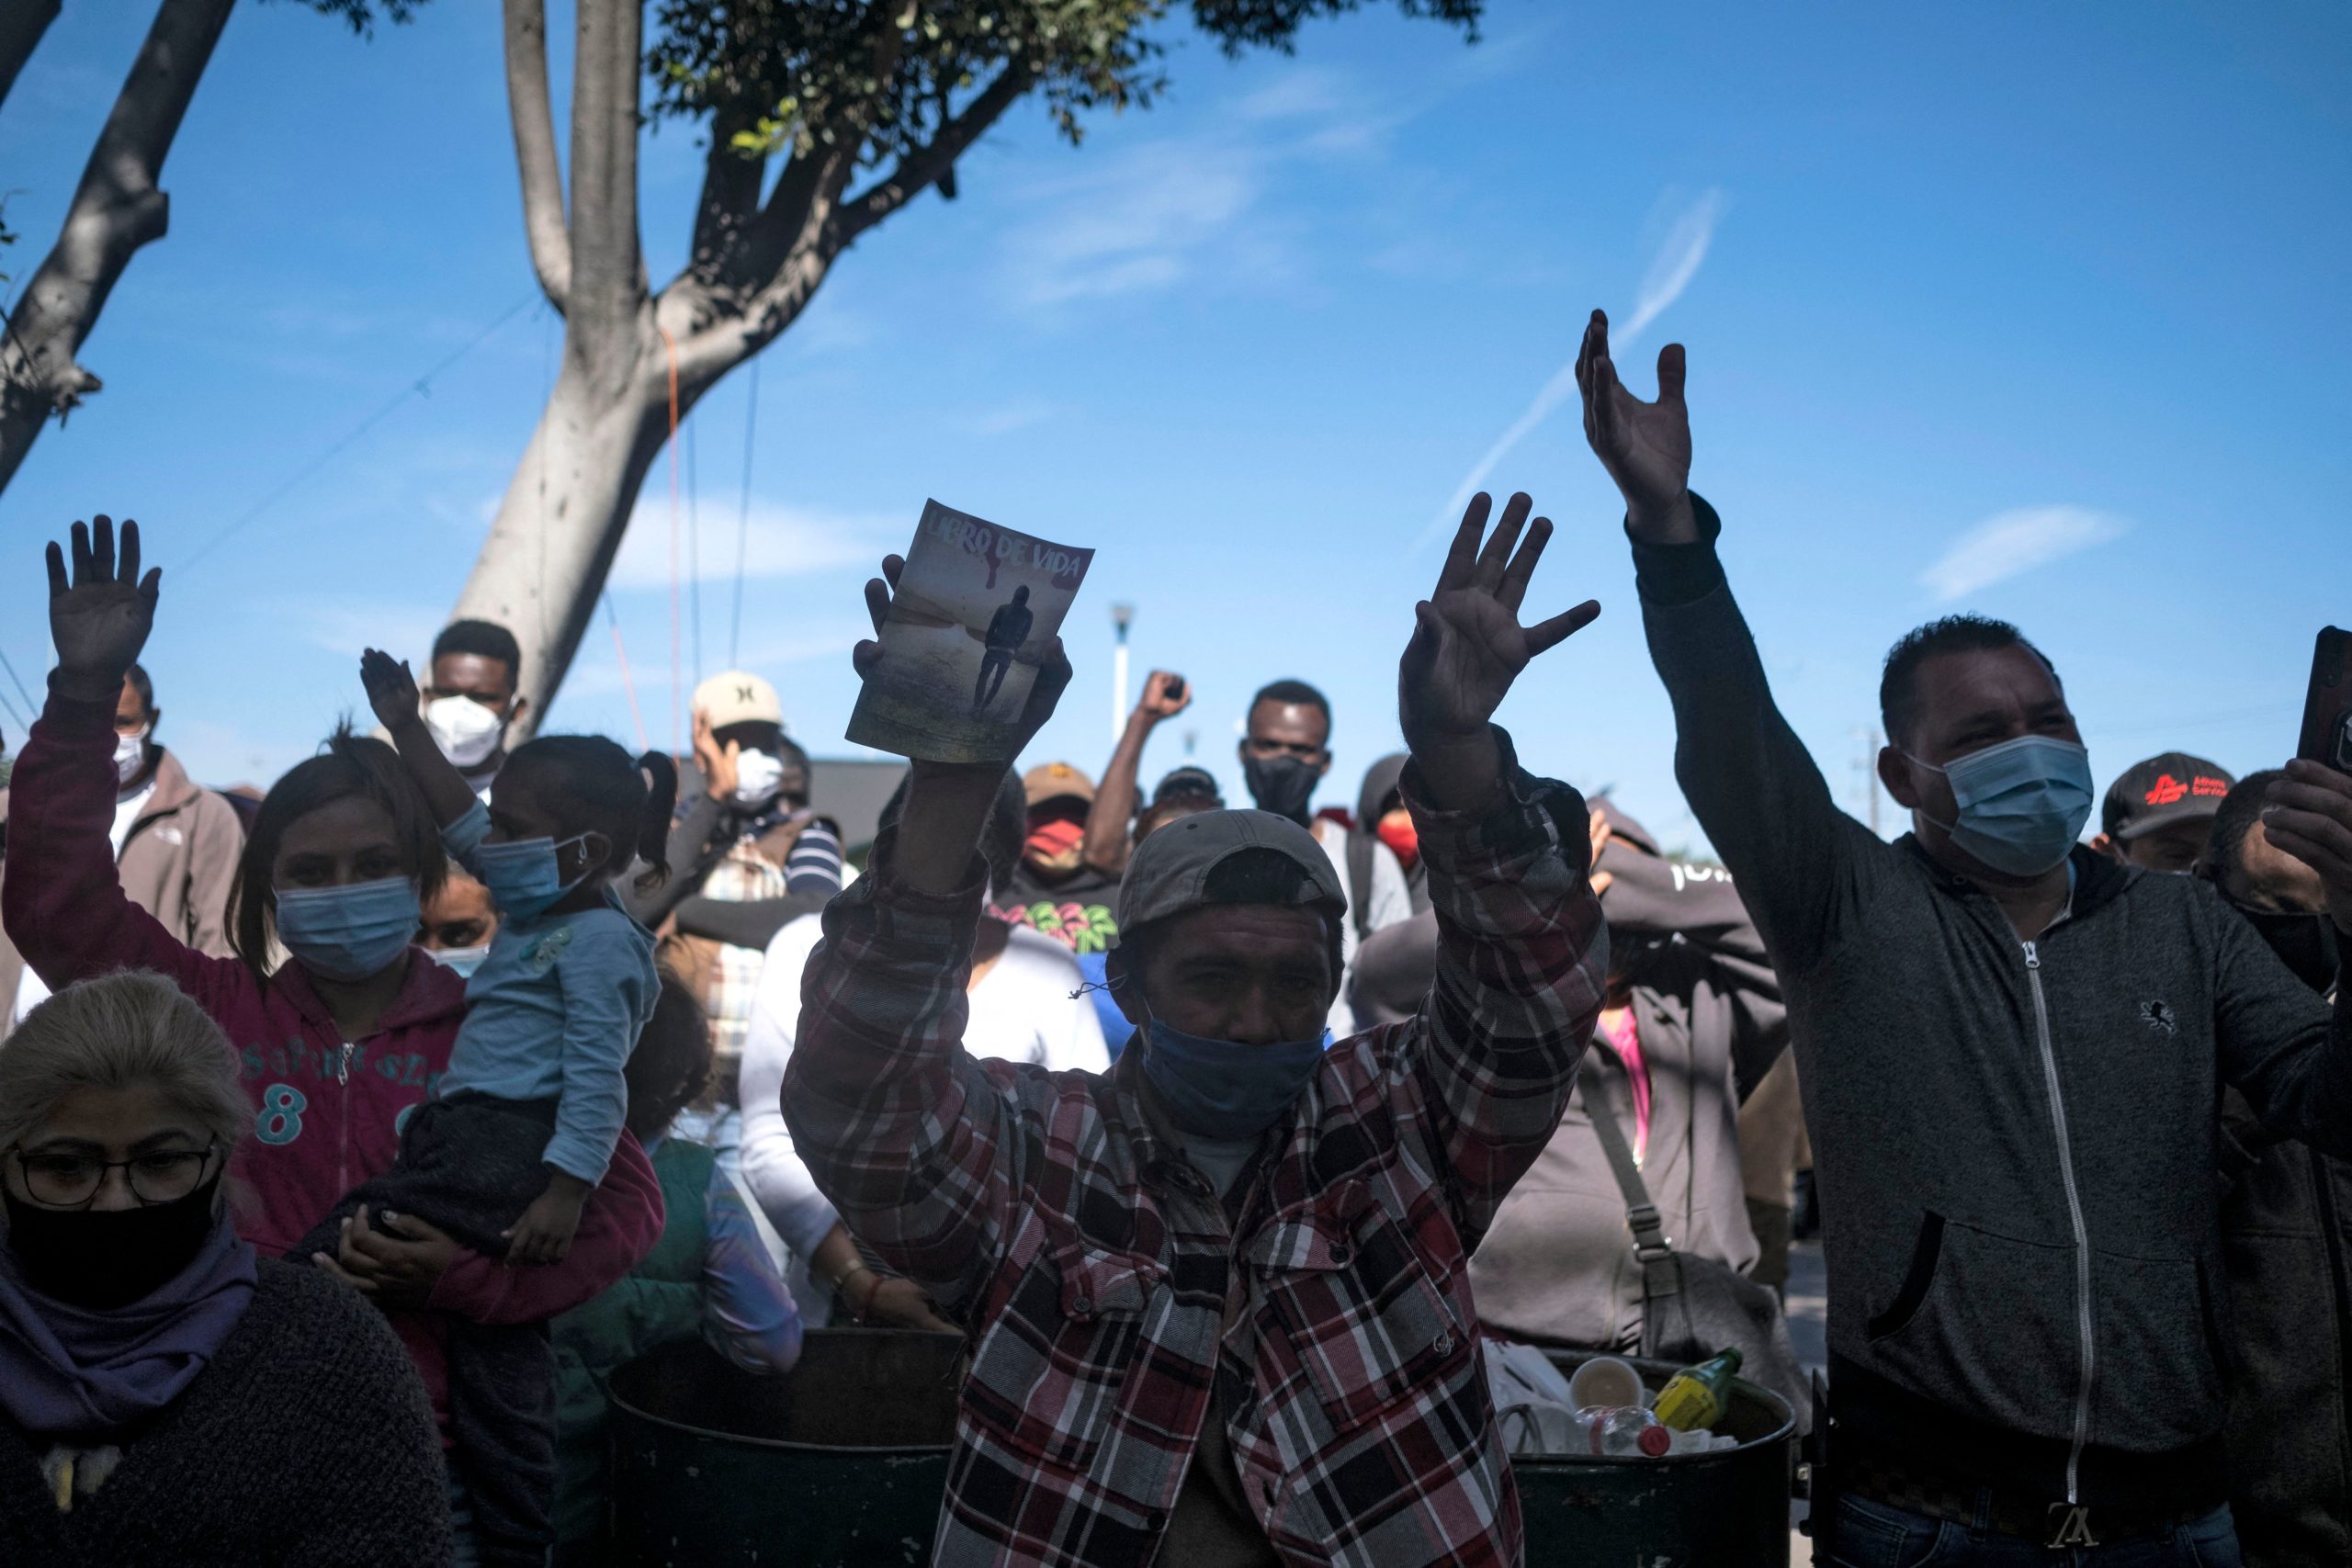 Migrants pray at camp where asylum seekers wait for US authorities to allow them to start their migration process outside El Chaparral crossing port in Tijuana, Baja California state, Mexico on March 17, 2021. (Photo by GUILLERMO ARIAS/AFP via Getty Images)